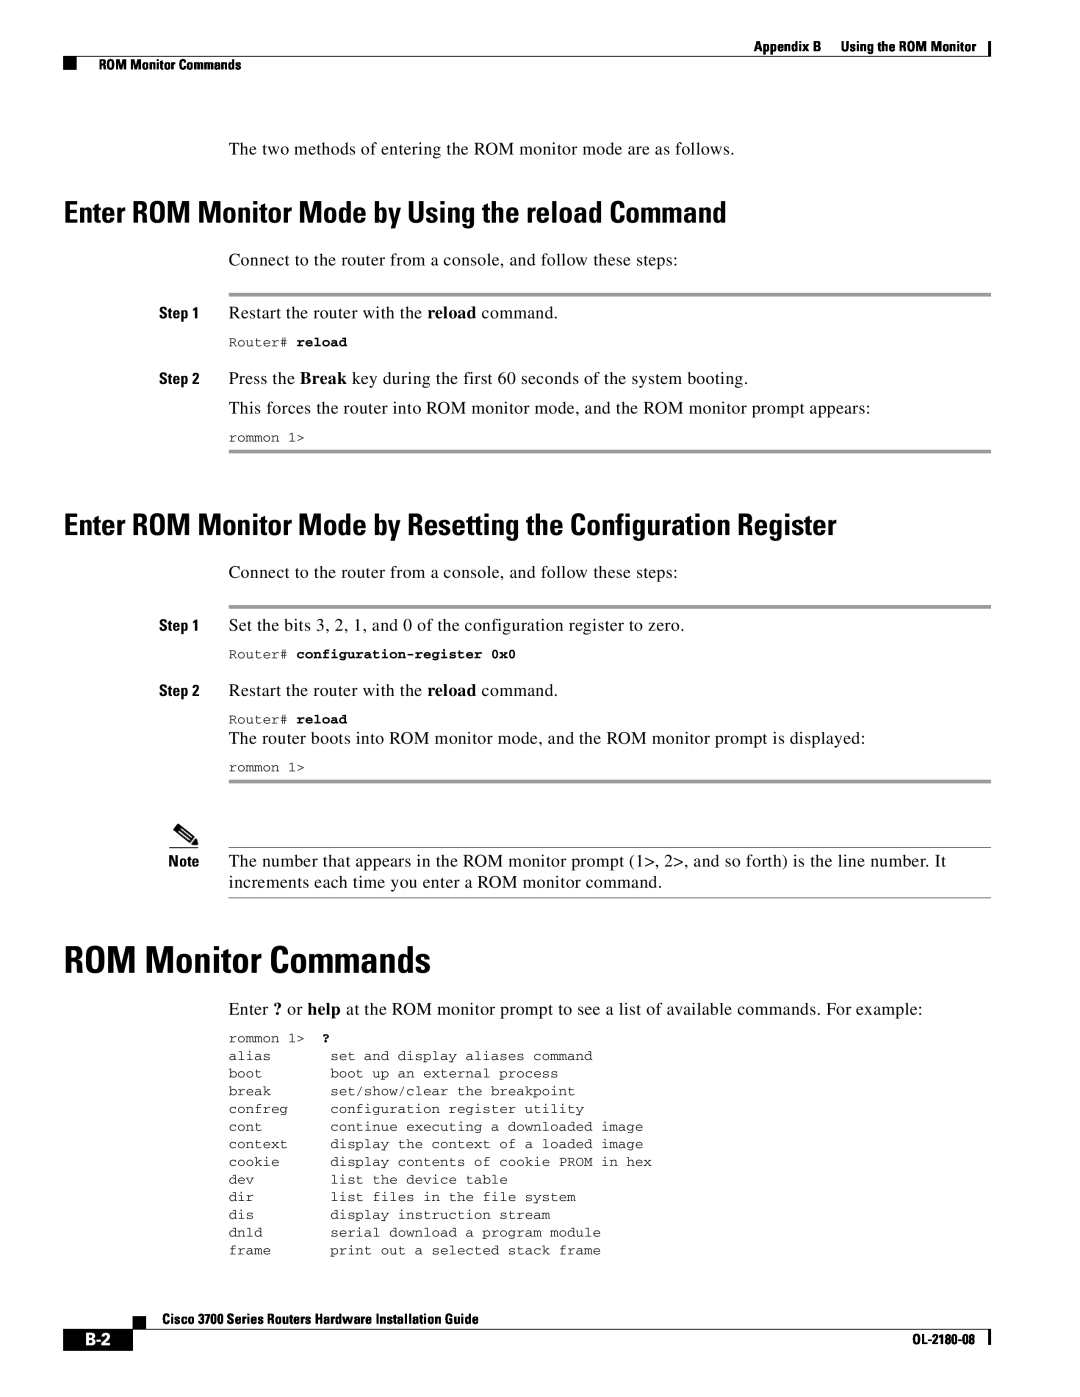 Cisco Systems 3700 Series manual ROM Monitor Commands, Enter ROM Monitor Mode by Using the reload Command 